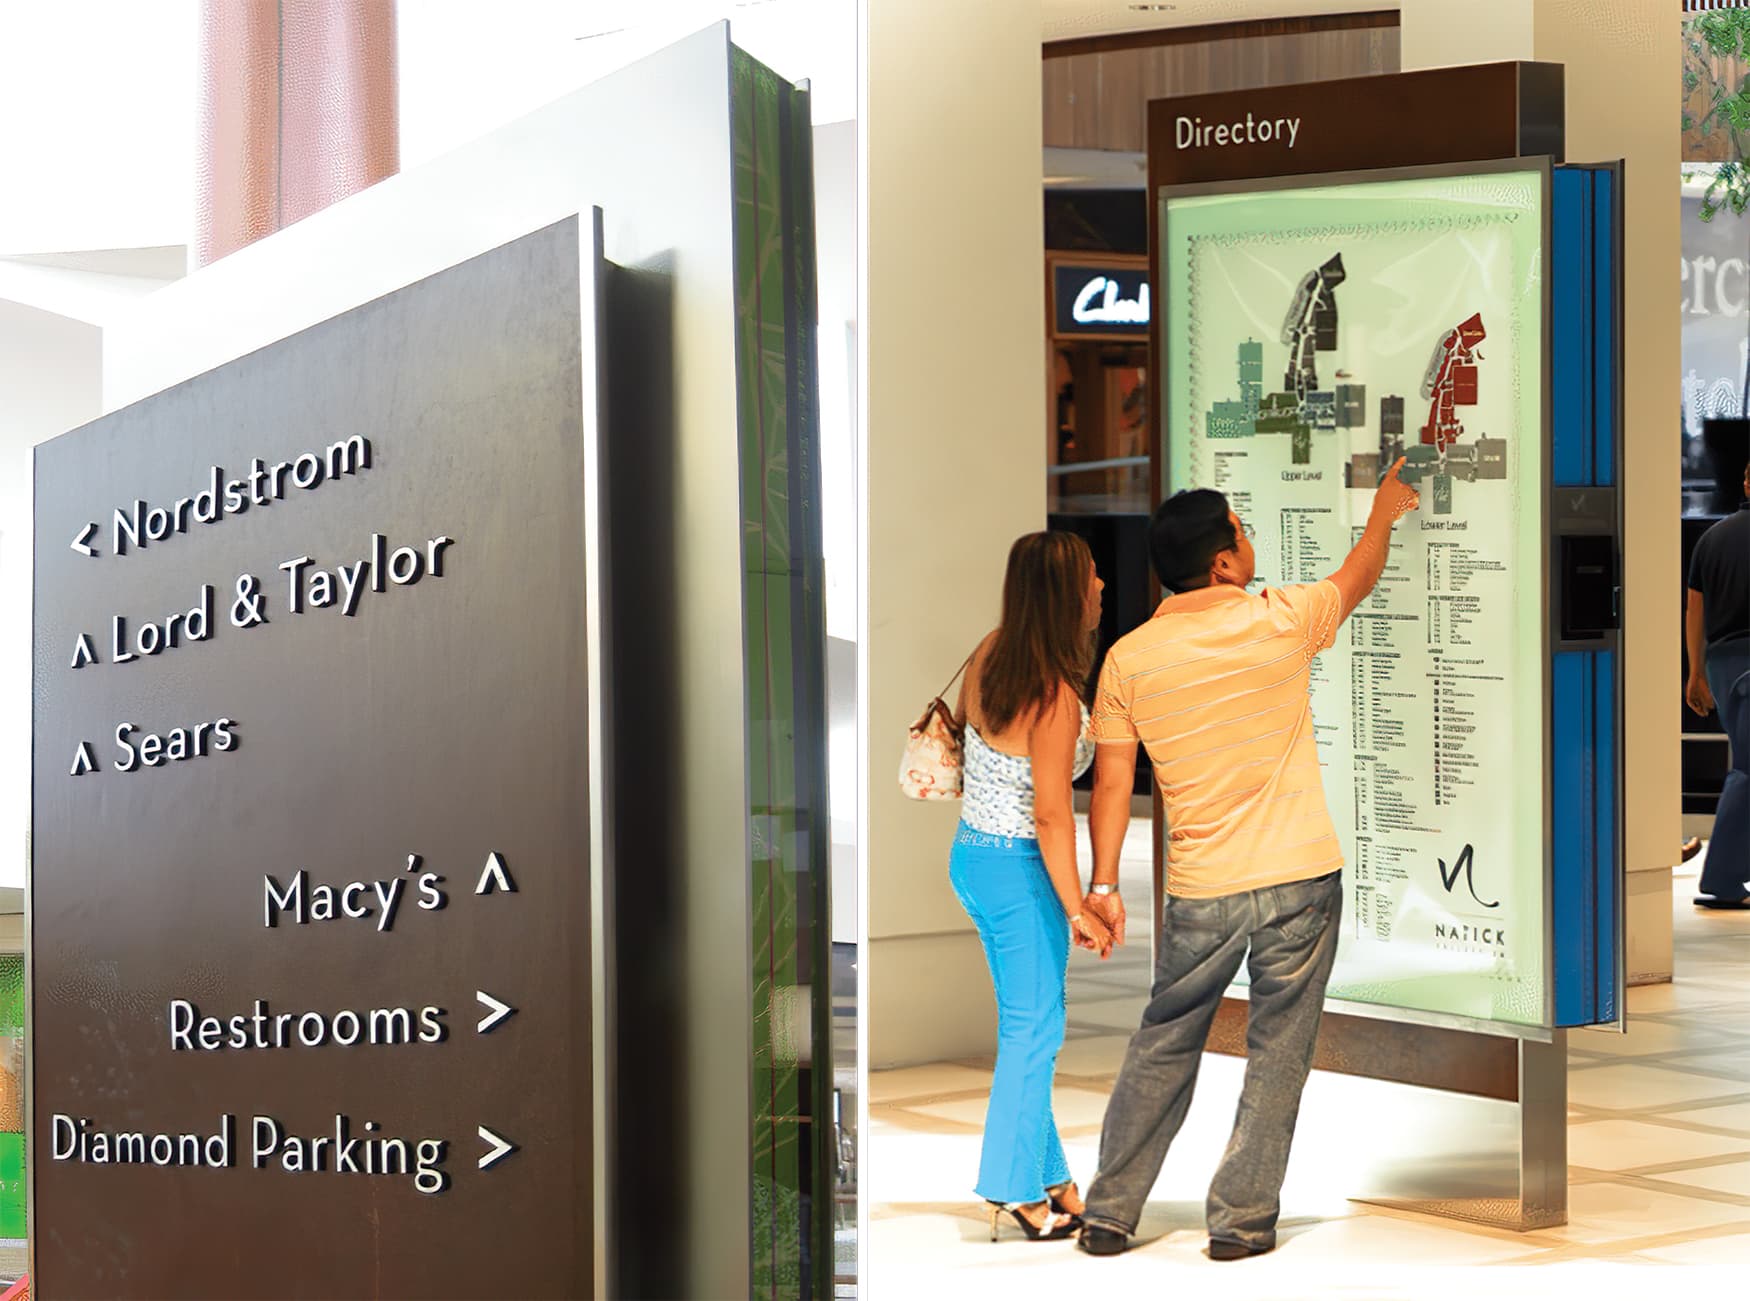 Natick Collection, New England's largest mixed-use retail destination, commissioned RSM Design to create a brand identity as well as a placemaking, identity, and wayfinding features. Pedestrian Wayfinding Design. Retail Directory Map Design.